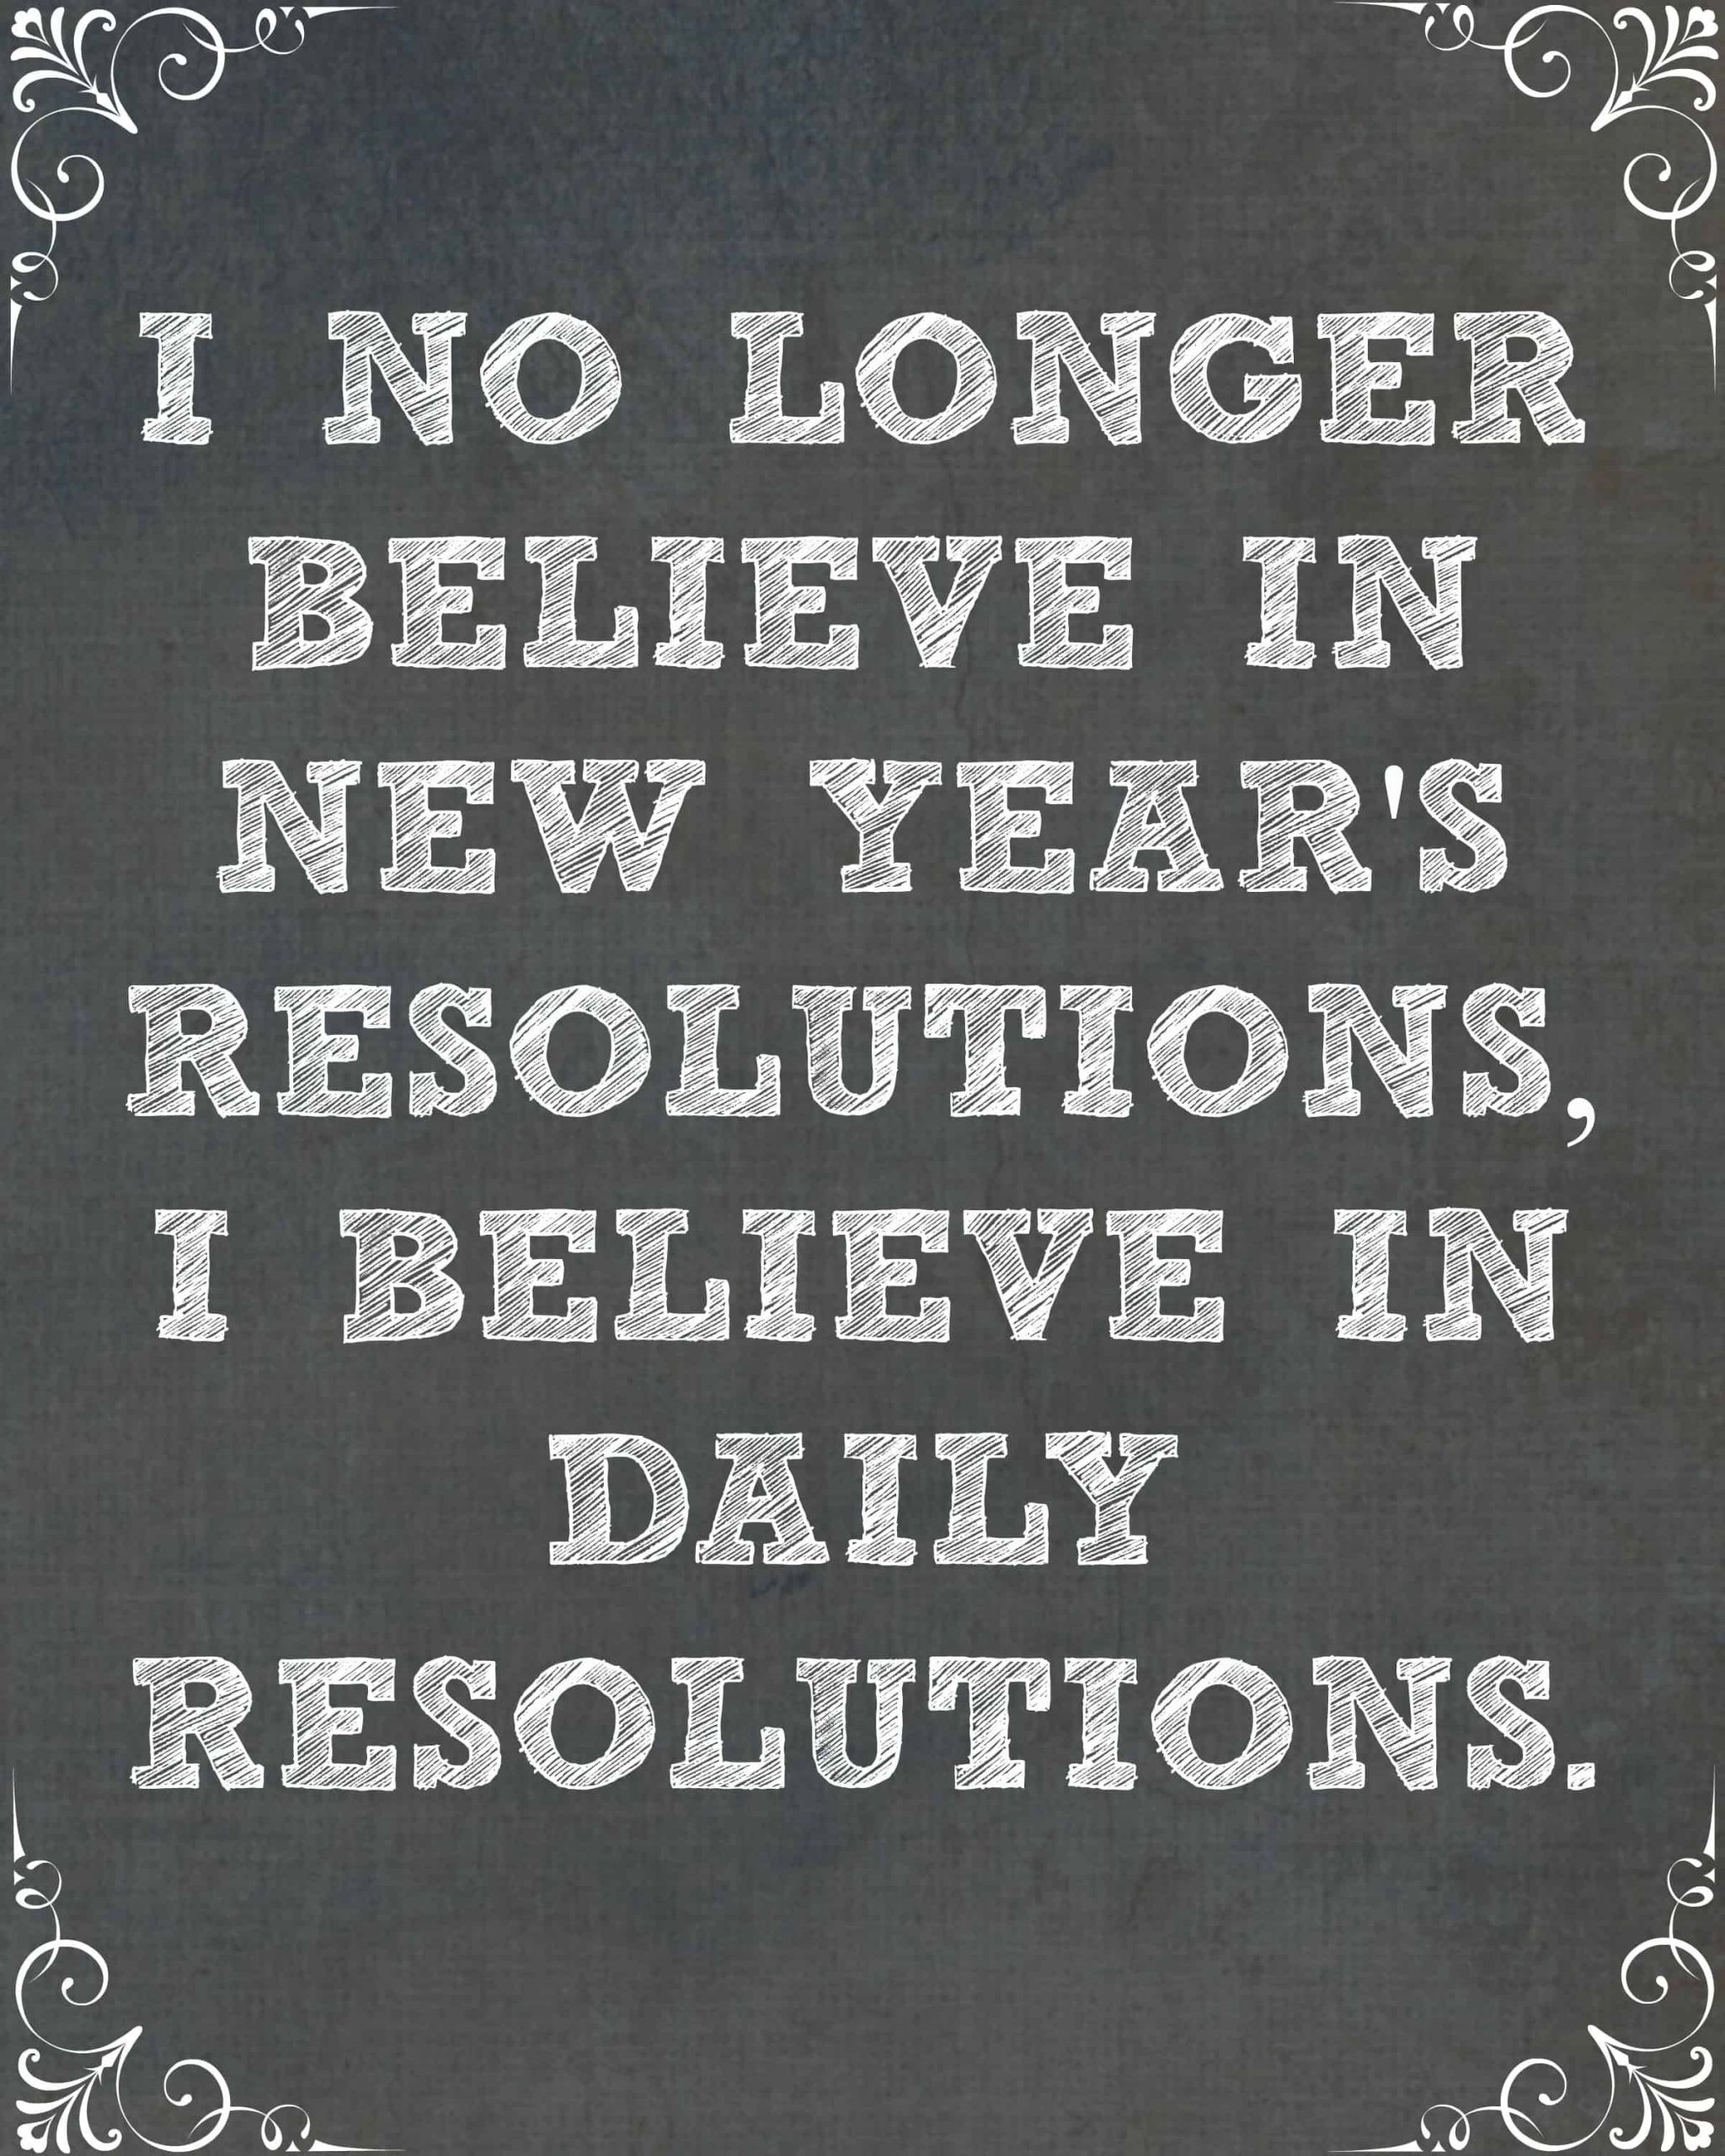 New Year Resolutions Quotes
 Any New Year Resolutions 2018